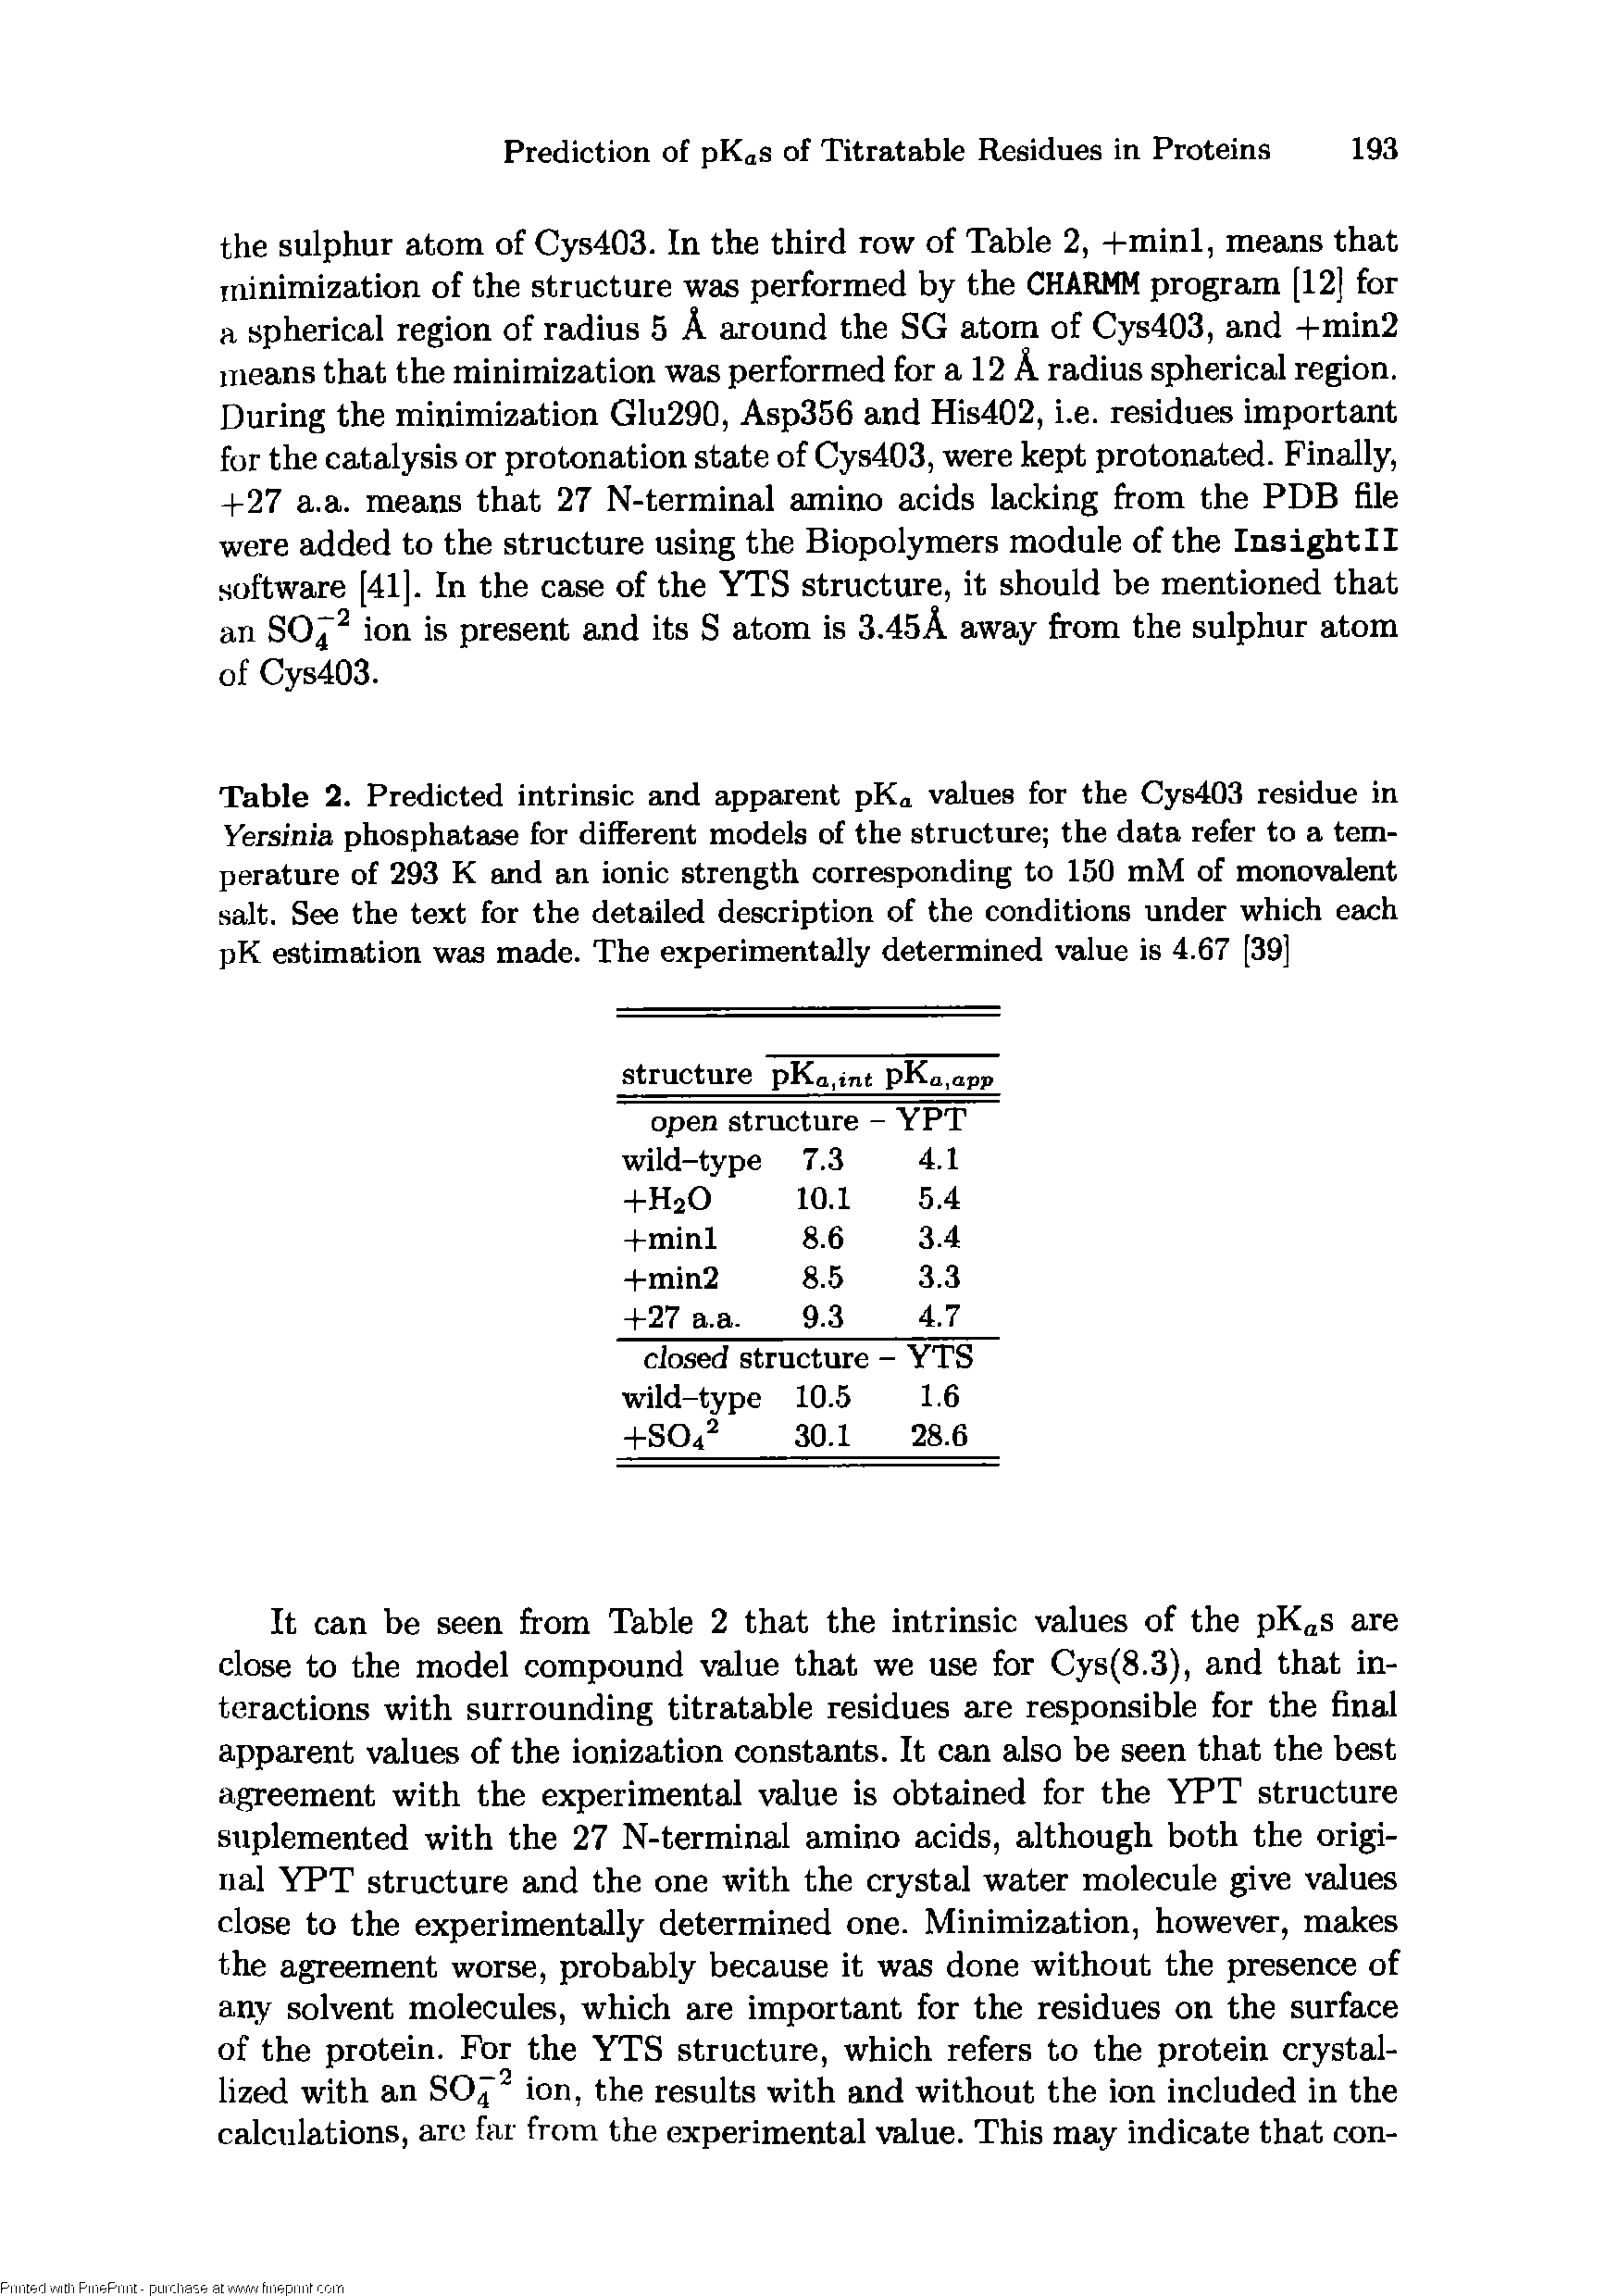 Table 2. Predicted intrinsic and apparent pKa values for the Cys403 residue in Yersinia phosphatase for different models of the structure the data refer to a temperature of 293 K and an ionic strength corresponding to 150 mM of monovalent salt. See the text for the detailed description of the conditions under which each pK estimation was made. The experimentally determined value is 4.67 [39]...